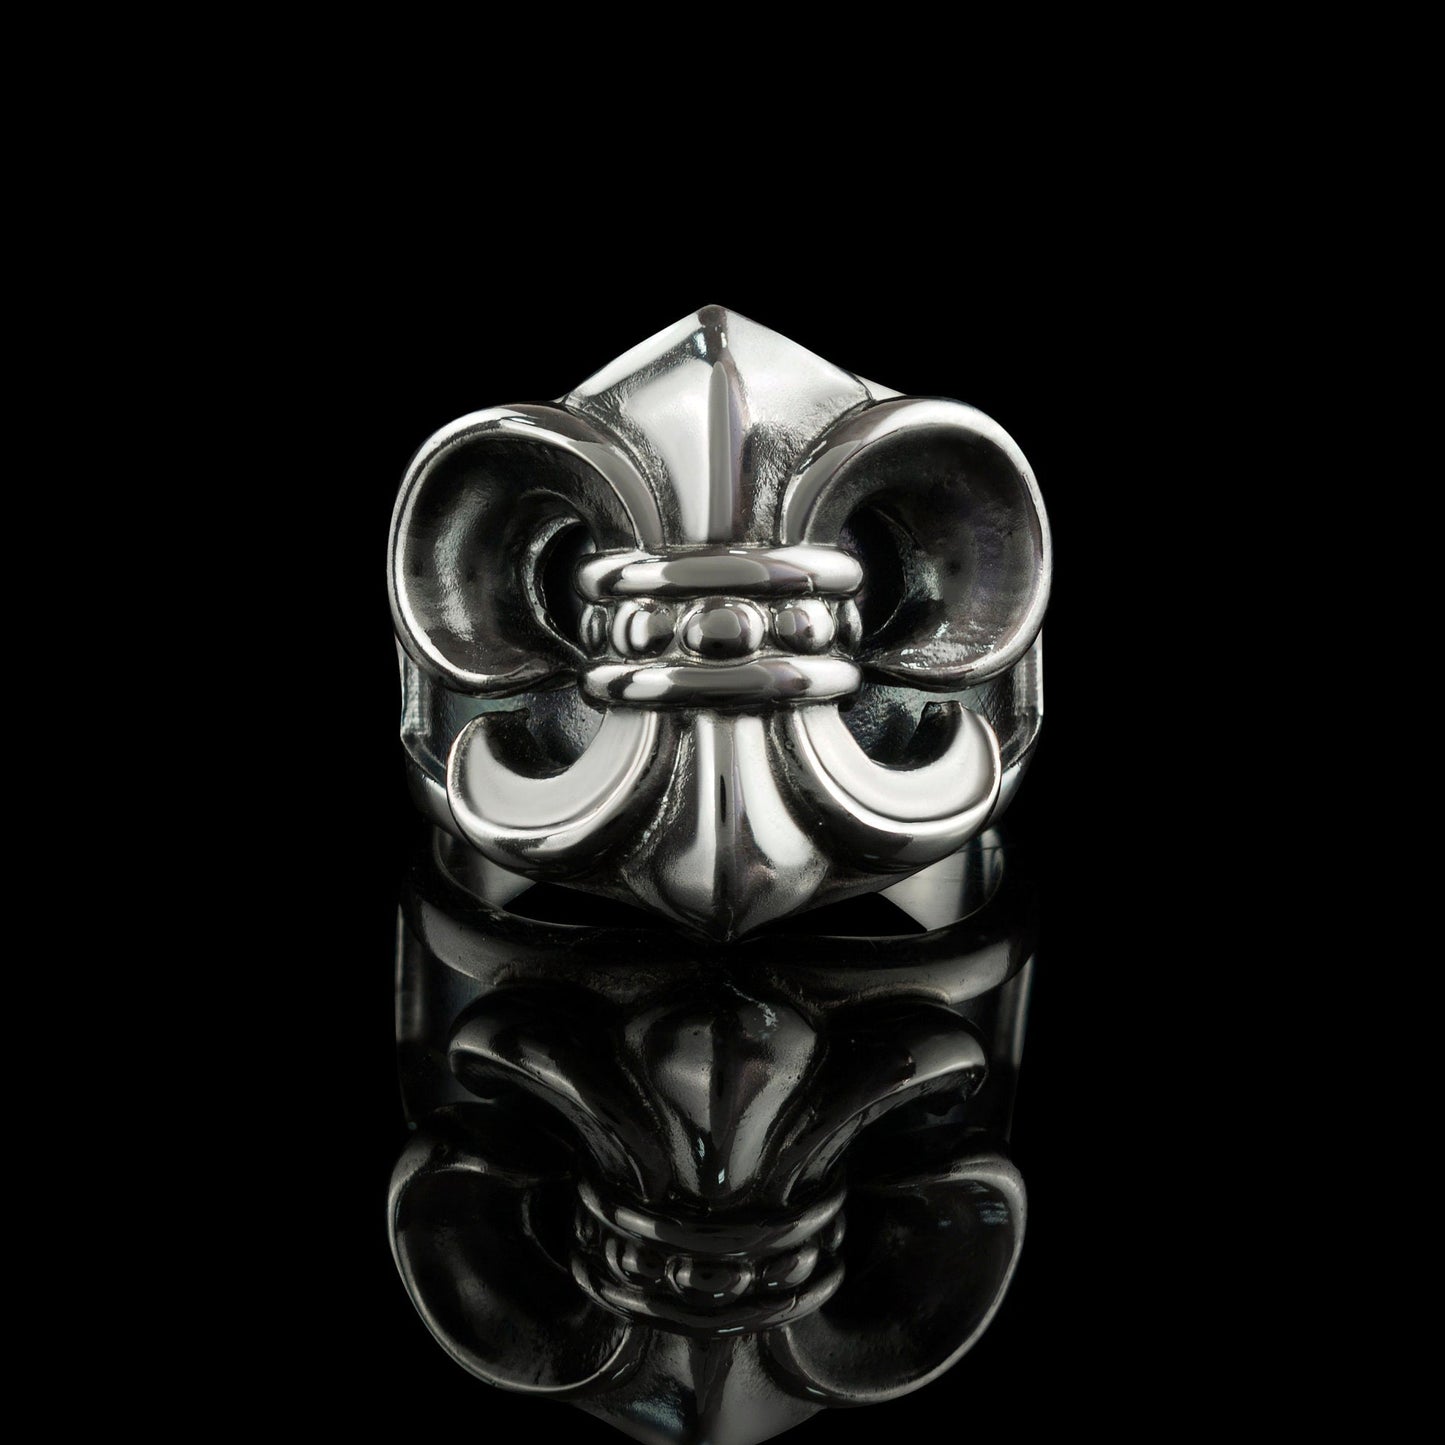 Fleur de Lis ring Silver jewelry French lily Biker jewelry Knight ring